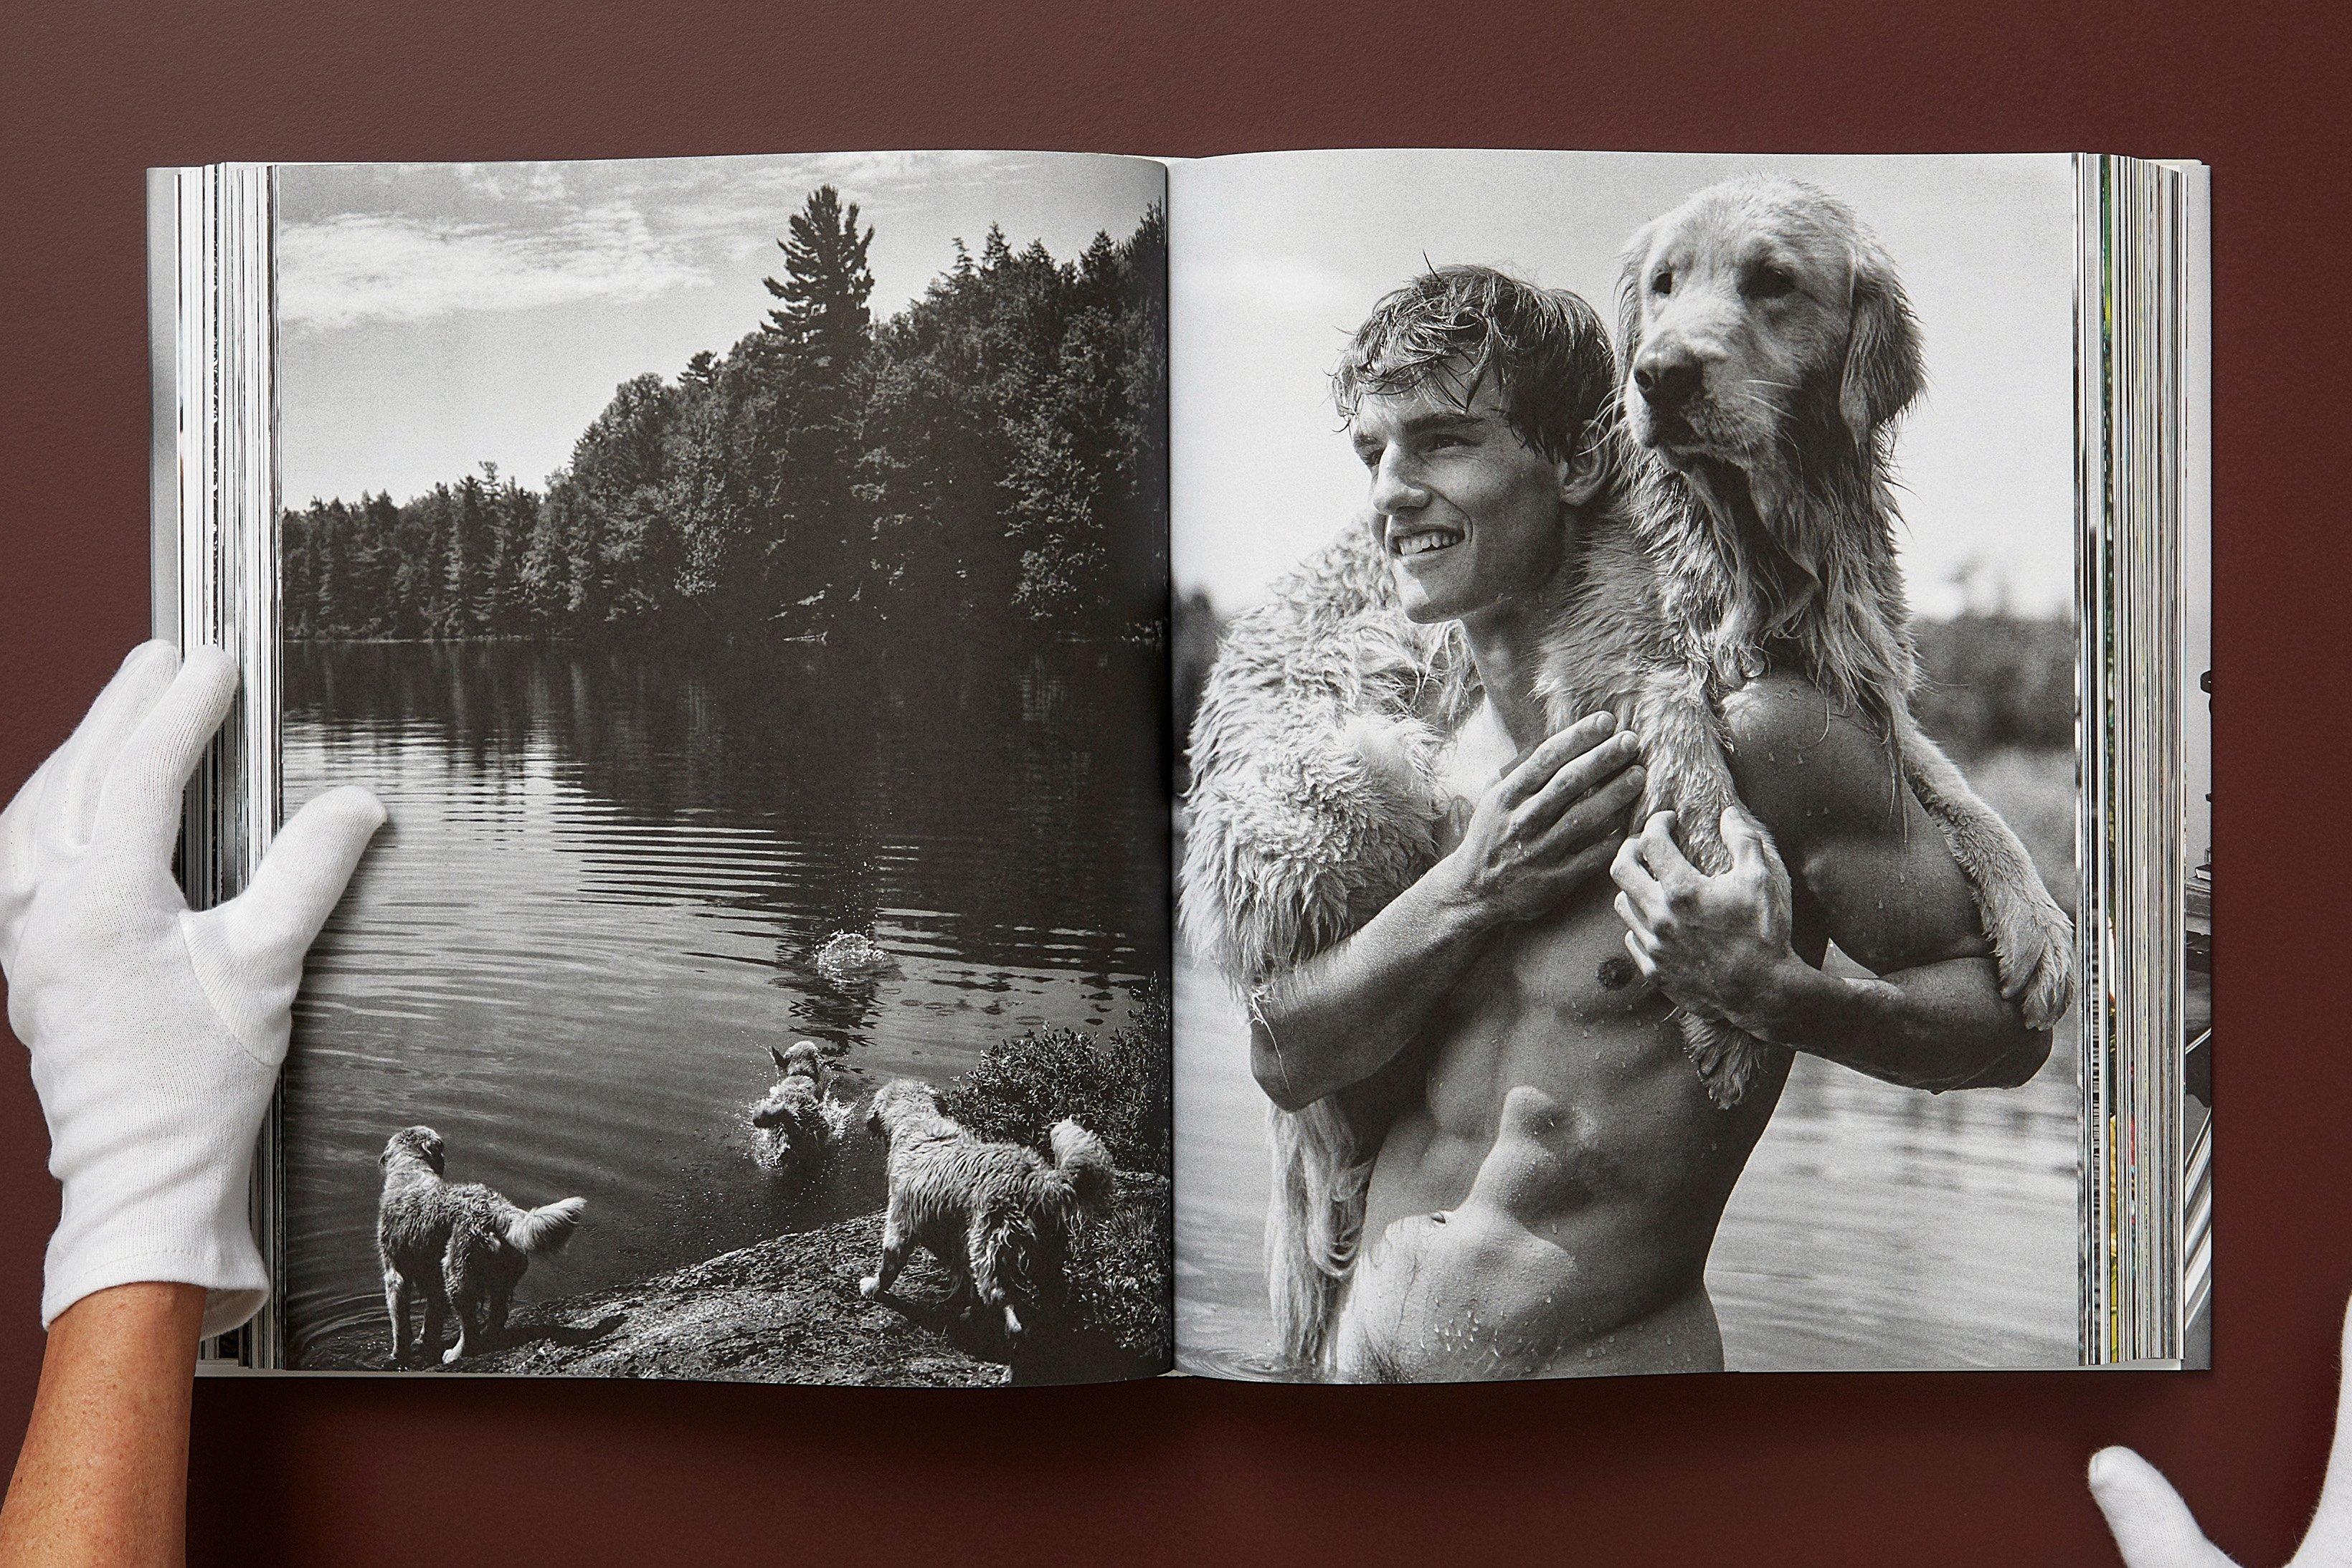 Archival pigment print on Hahnemühle Ultra Smooth, signed, dated and editioned by artist verso; studio stamped verso, 14 x 17 in.. Hardcover in slipcase, 11 x 14 in., 3,69 kg (8.12 lb), 520 pages.

Friends for Life
Bruce Weber’s photographs of the